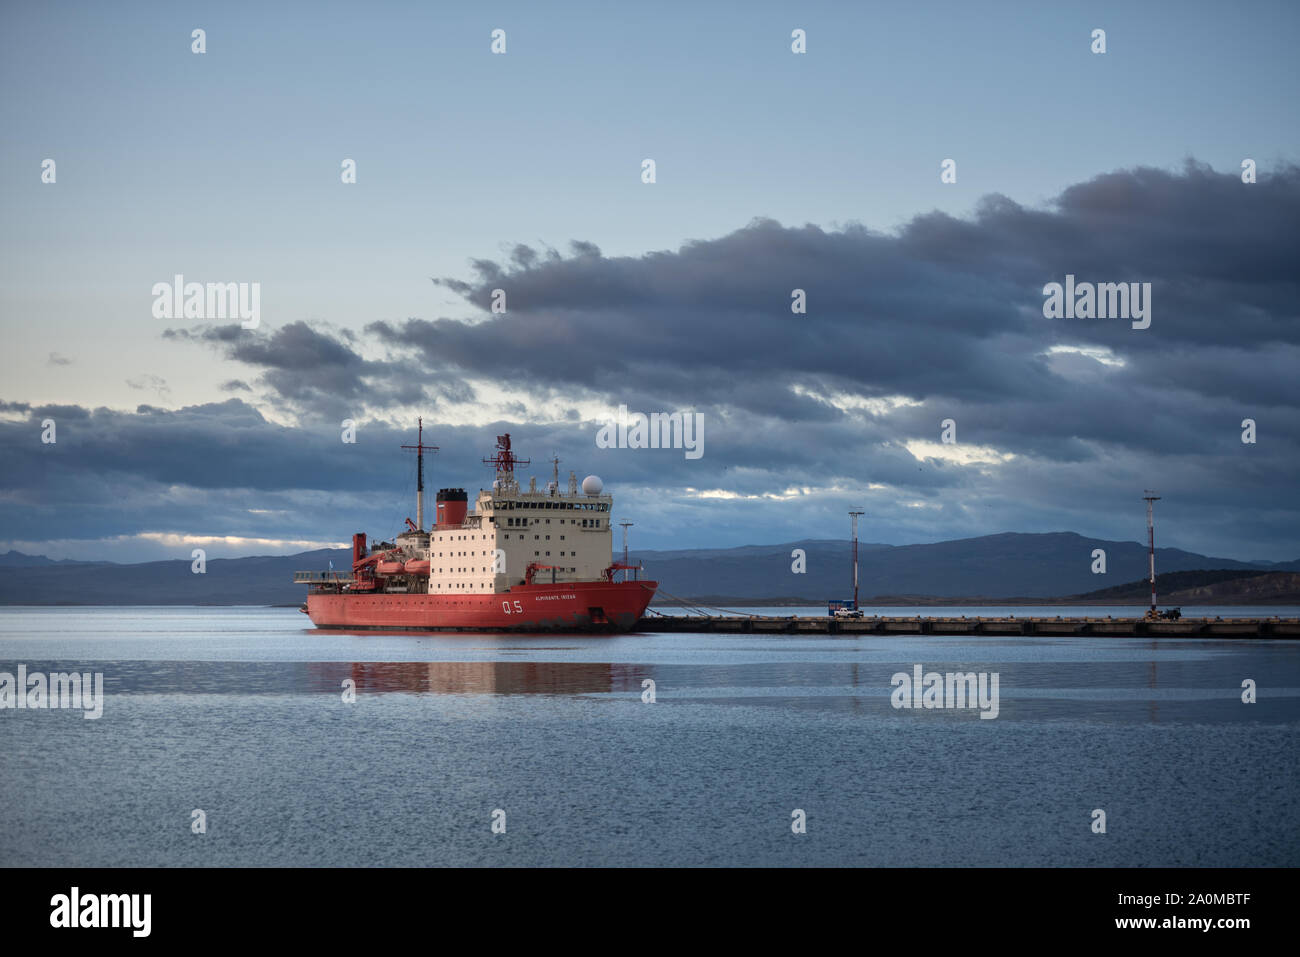 Ushuaia, Argentina - March 27 2019: The large icebreaker Almirante Irizar  moored in the seaport of the city. Stock Photo